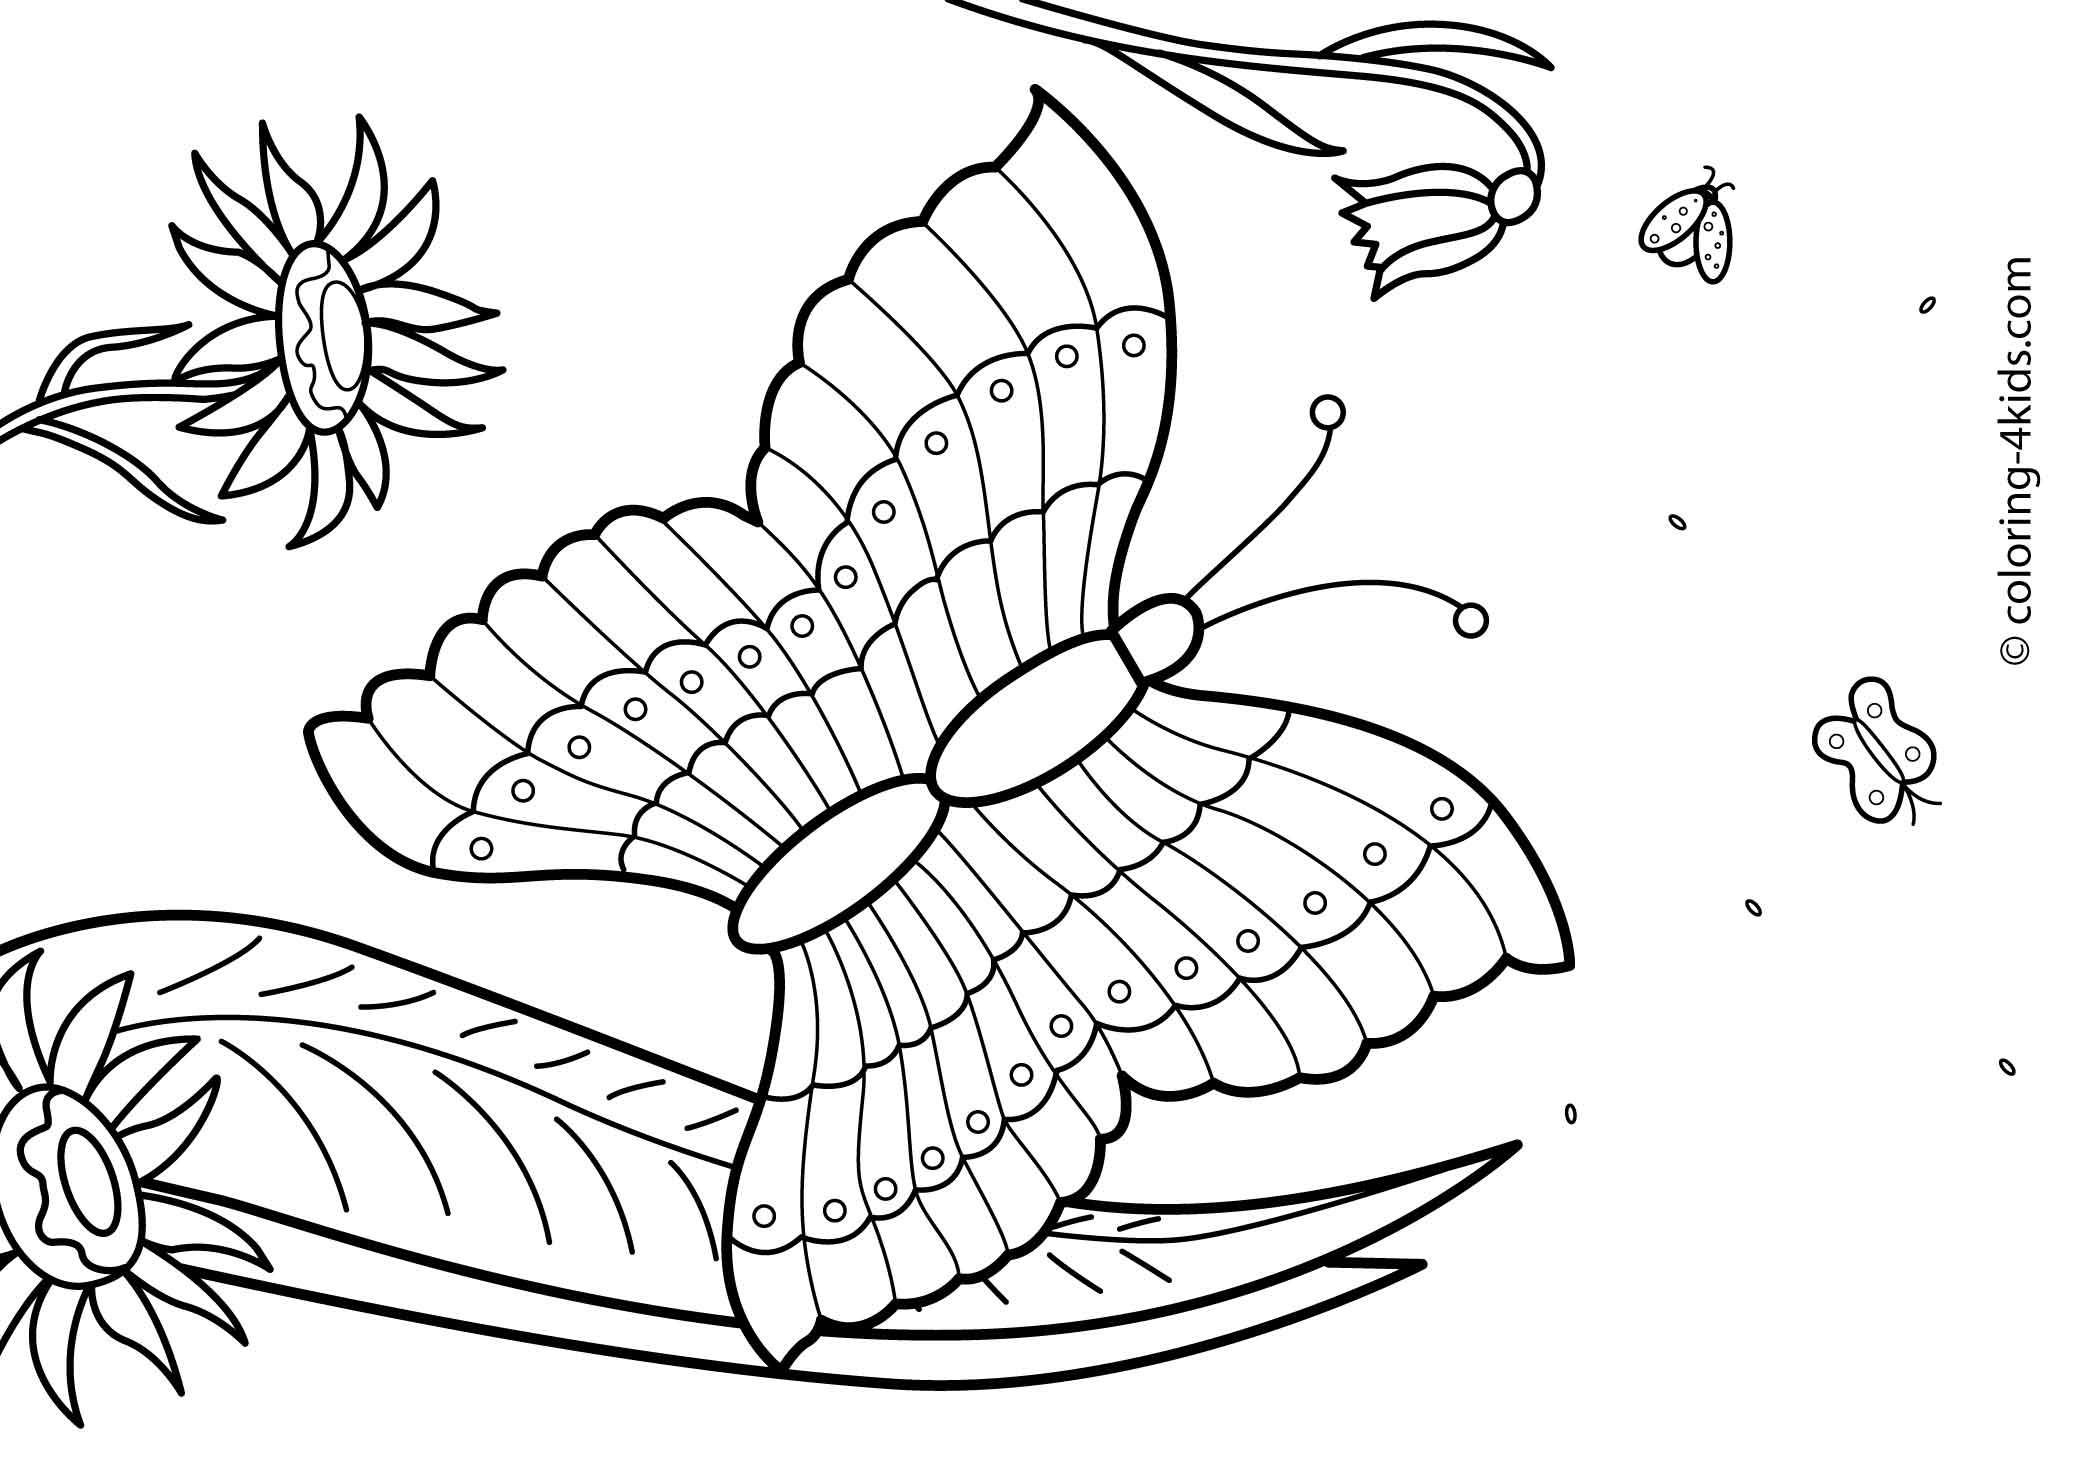 Summer Coloring Pages For Kids
 27 Summer season coloring pages part 2